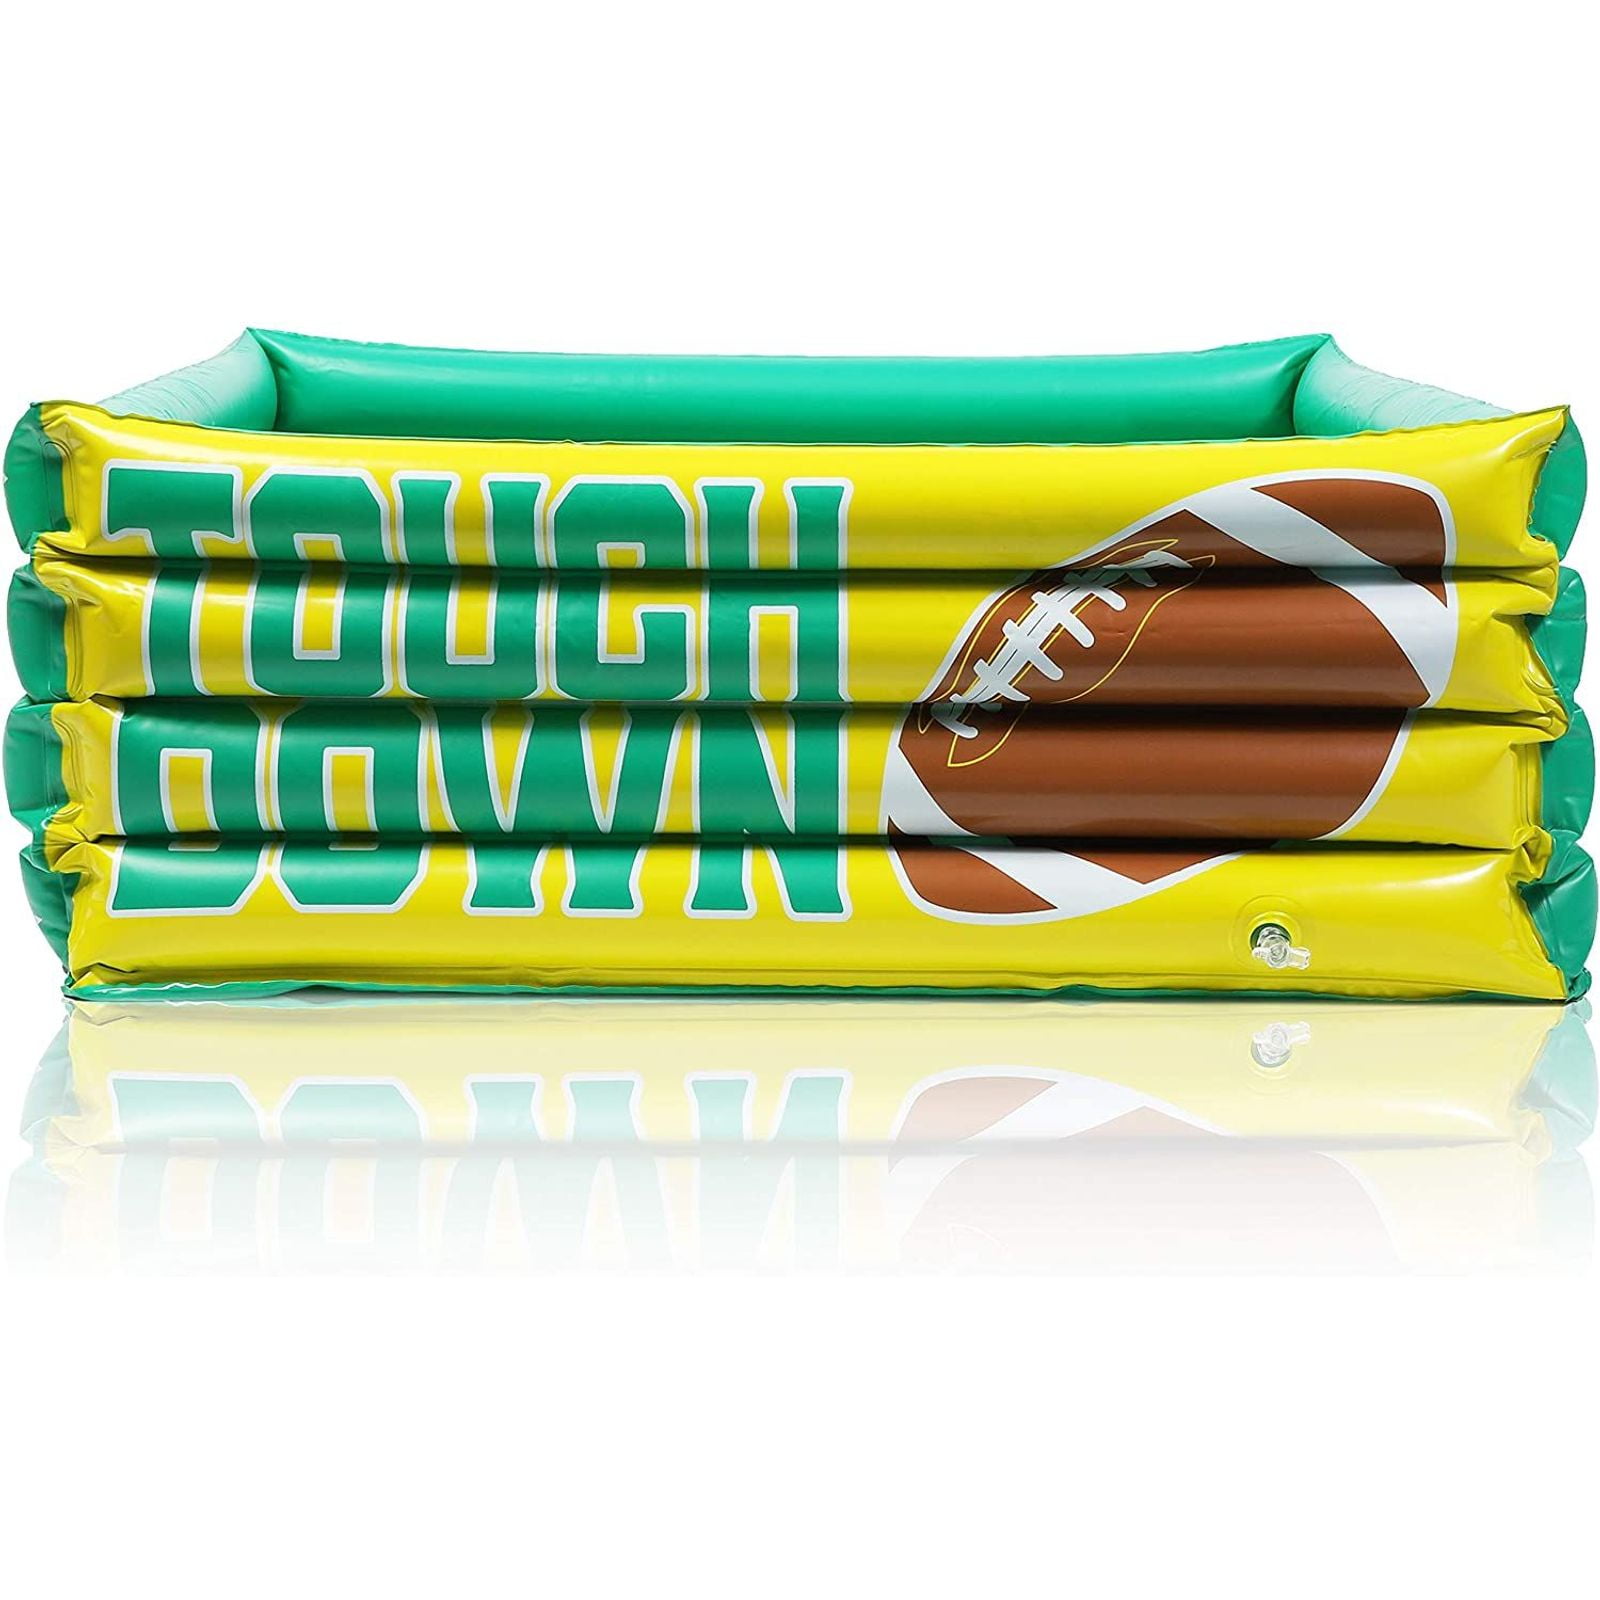 FOOTBALL PARTY INFLATABLE COOLER ~ Birthday Supplies Beverage Decoration Sports 